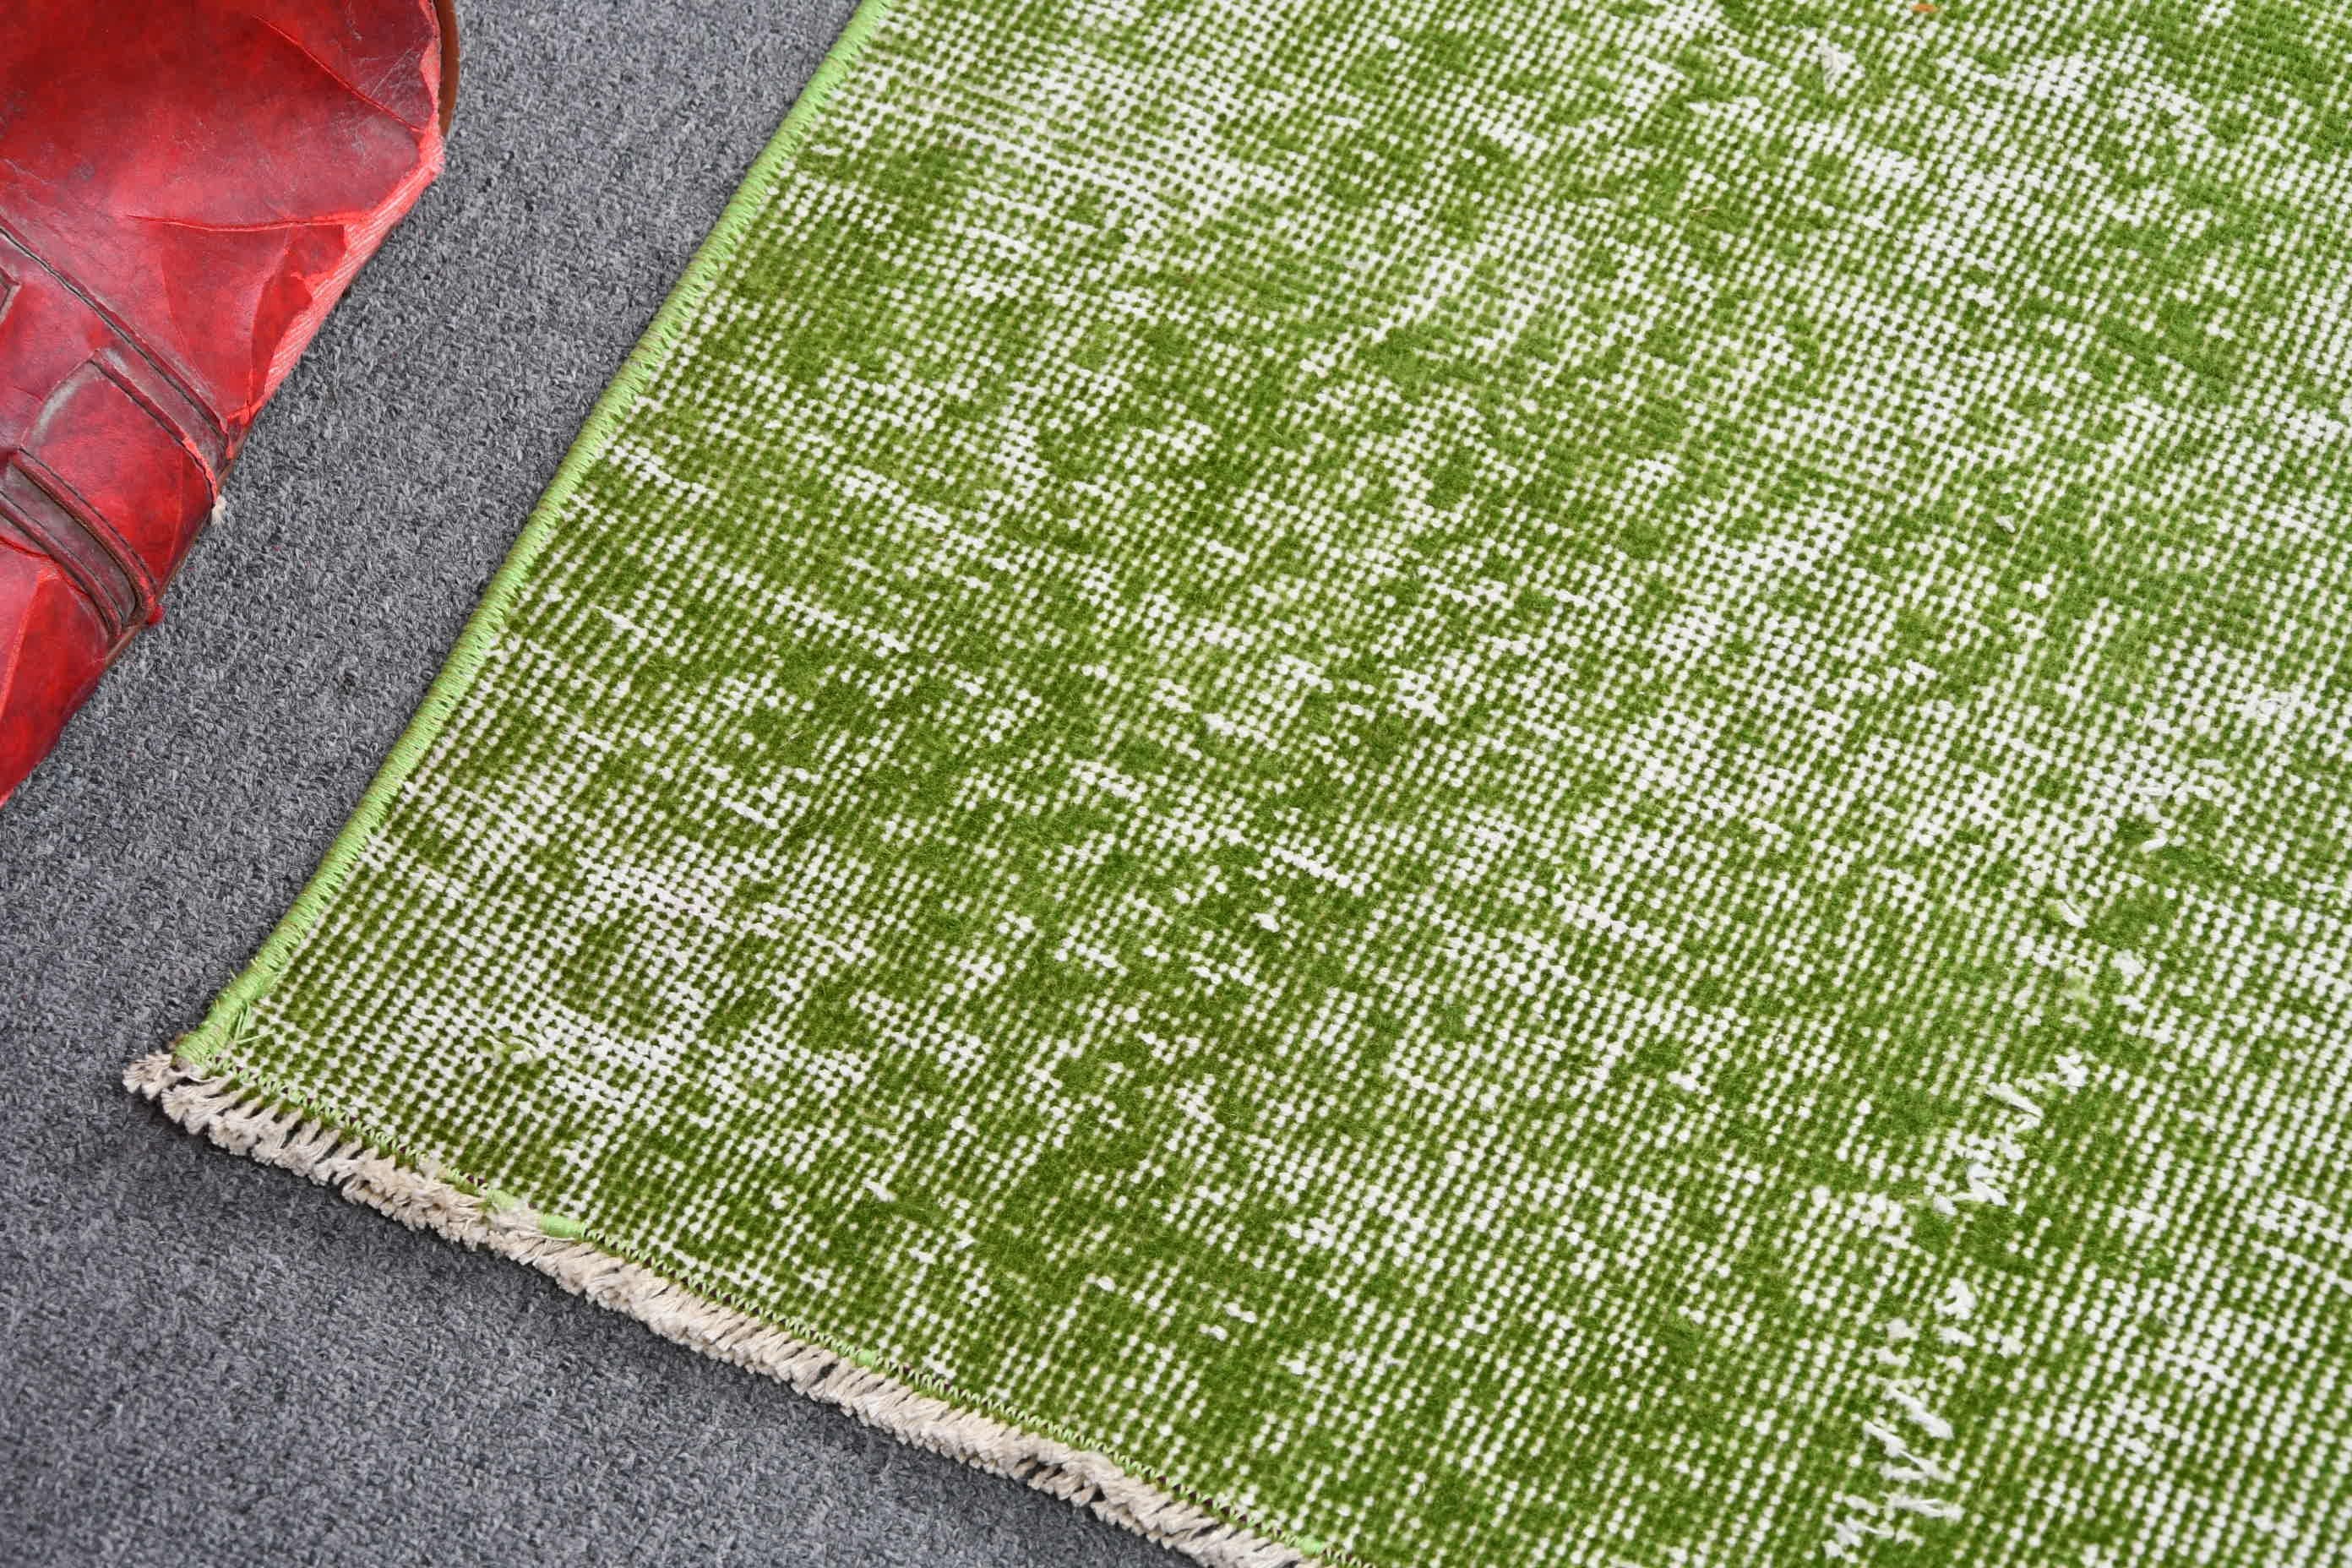 Turkish Rug, Bedroom Rugs, Rugs for Kitchen, Wool Rug, Vintage Rugs, Anatolian Rug, Green  2.3x3.3 ft Small Rugs, Car Mat Rug